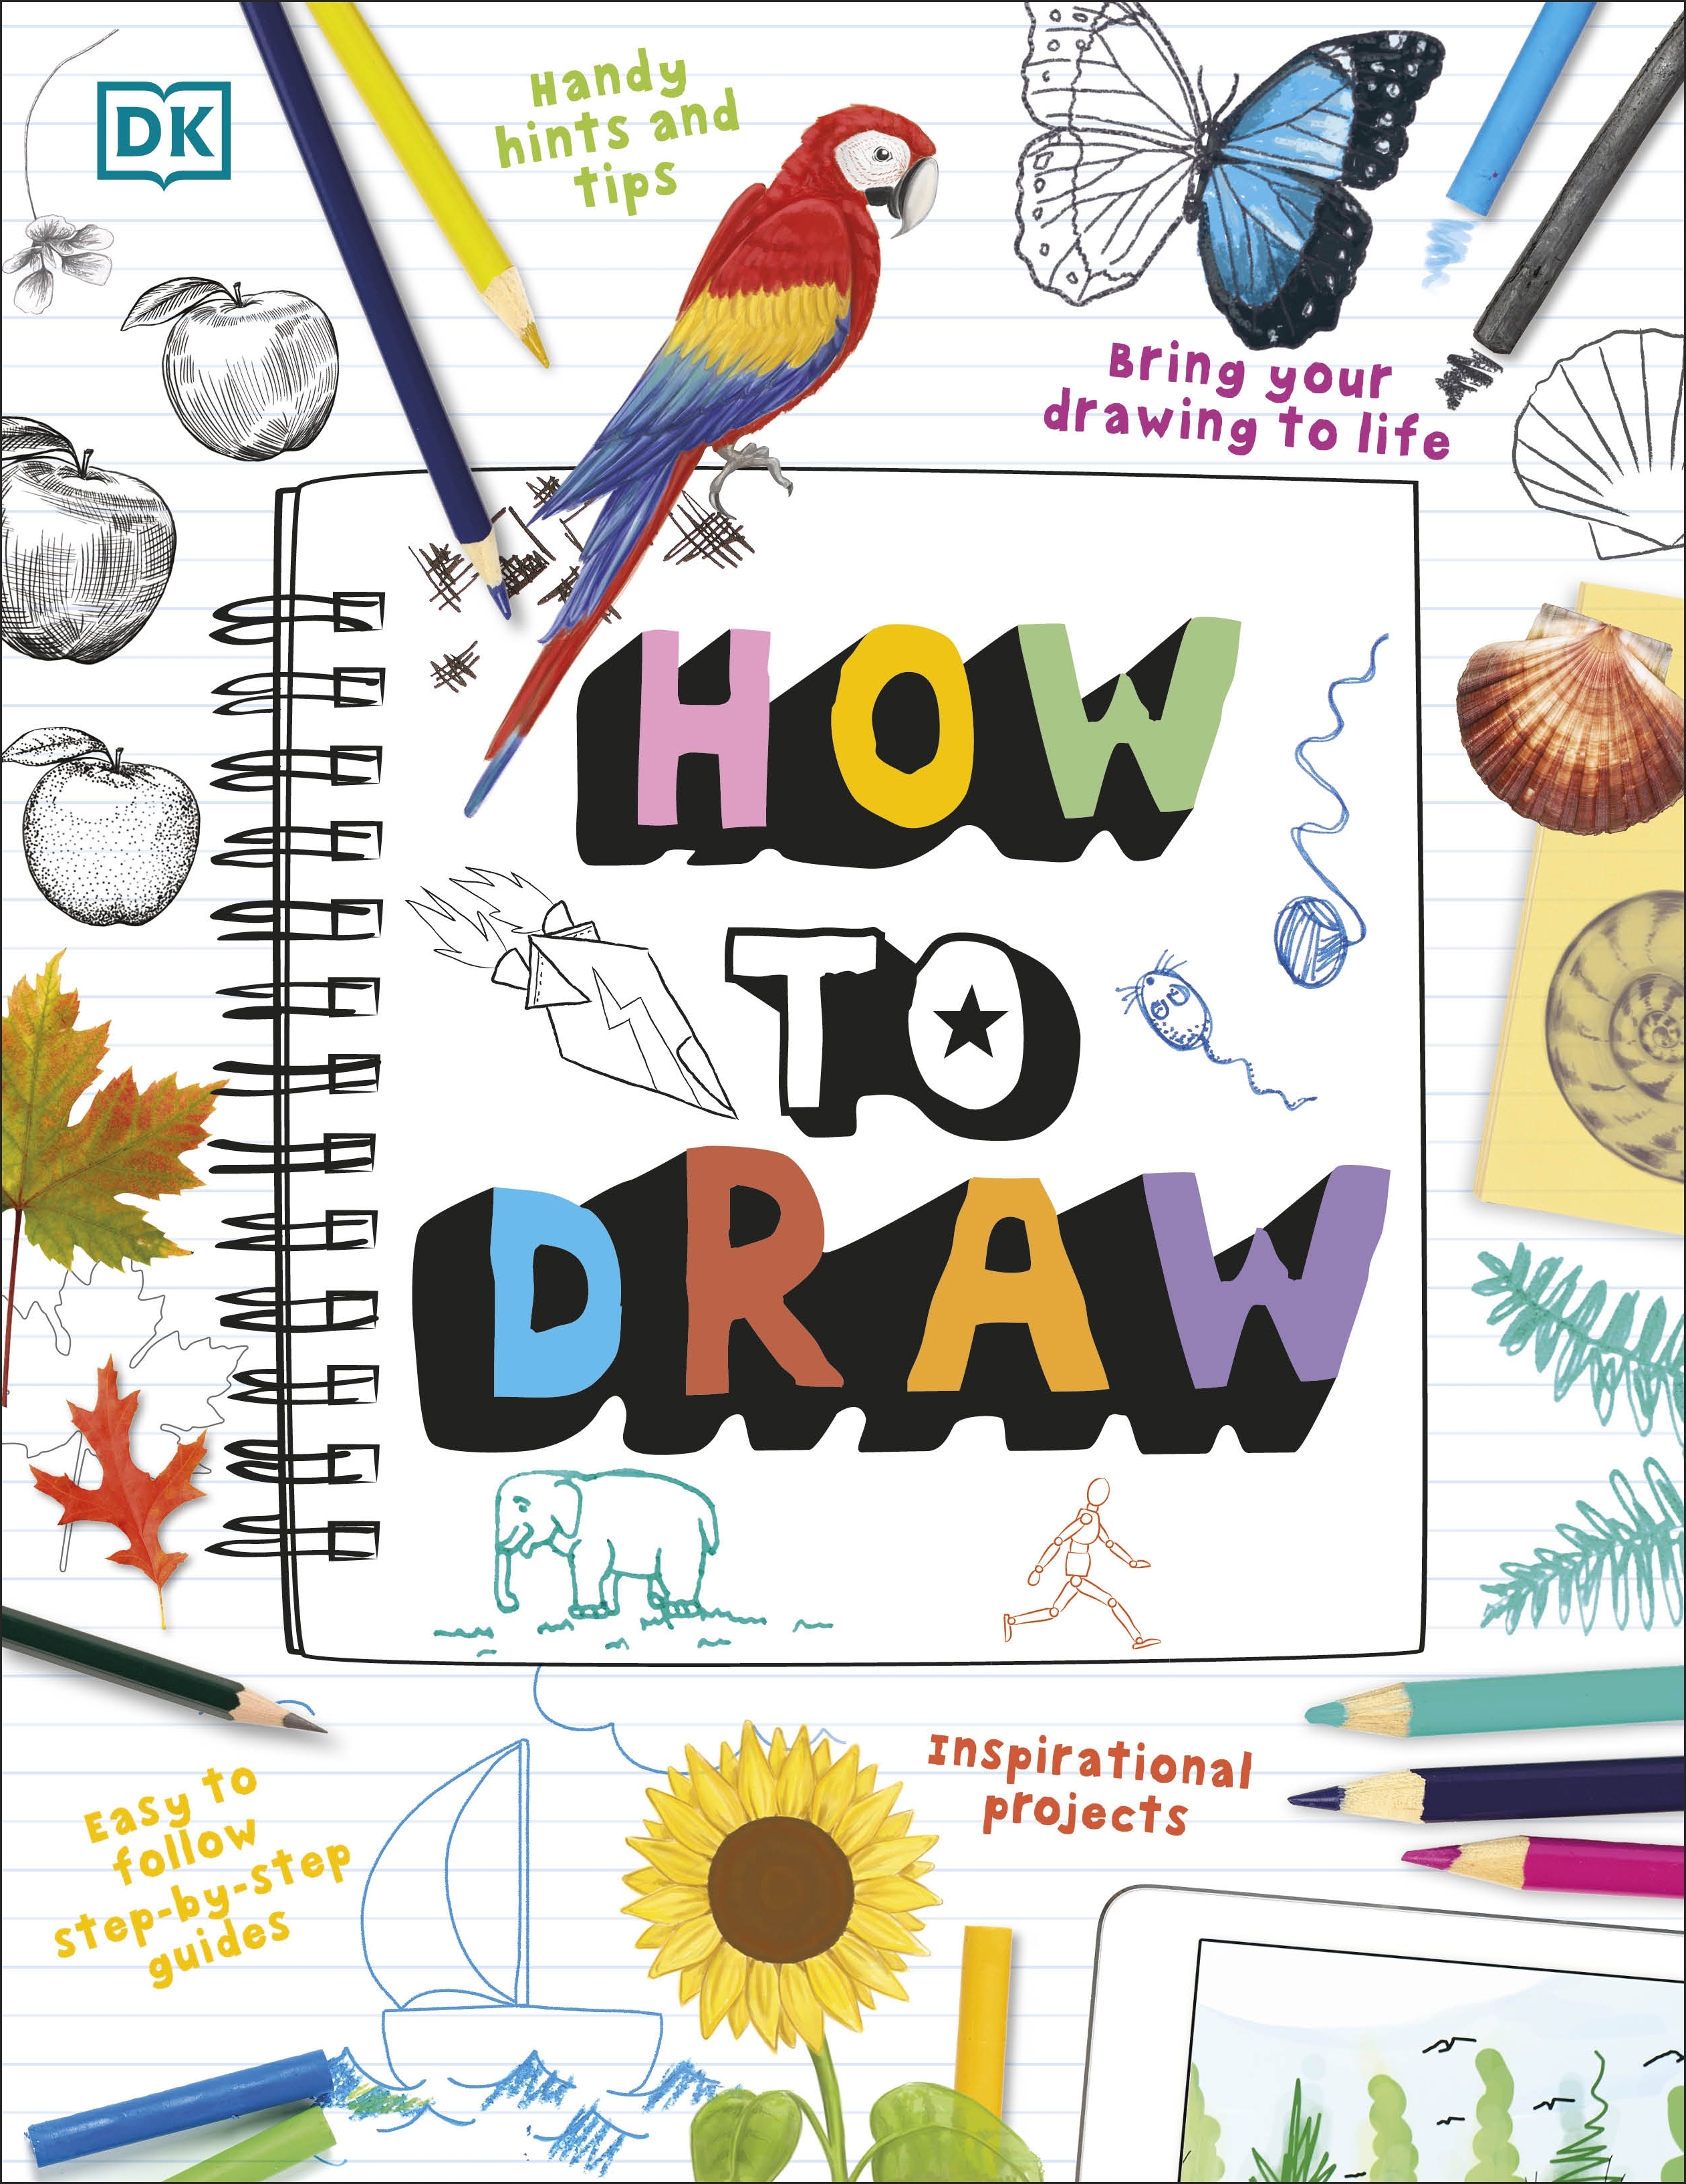 How to Draw Animals for Kids 6-8: Simple Step by Step Learn to Draw Books  for Kids (Paperback)